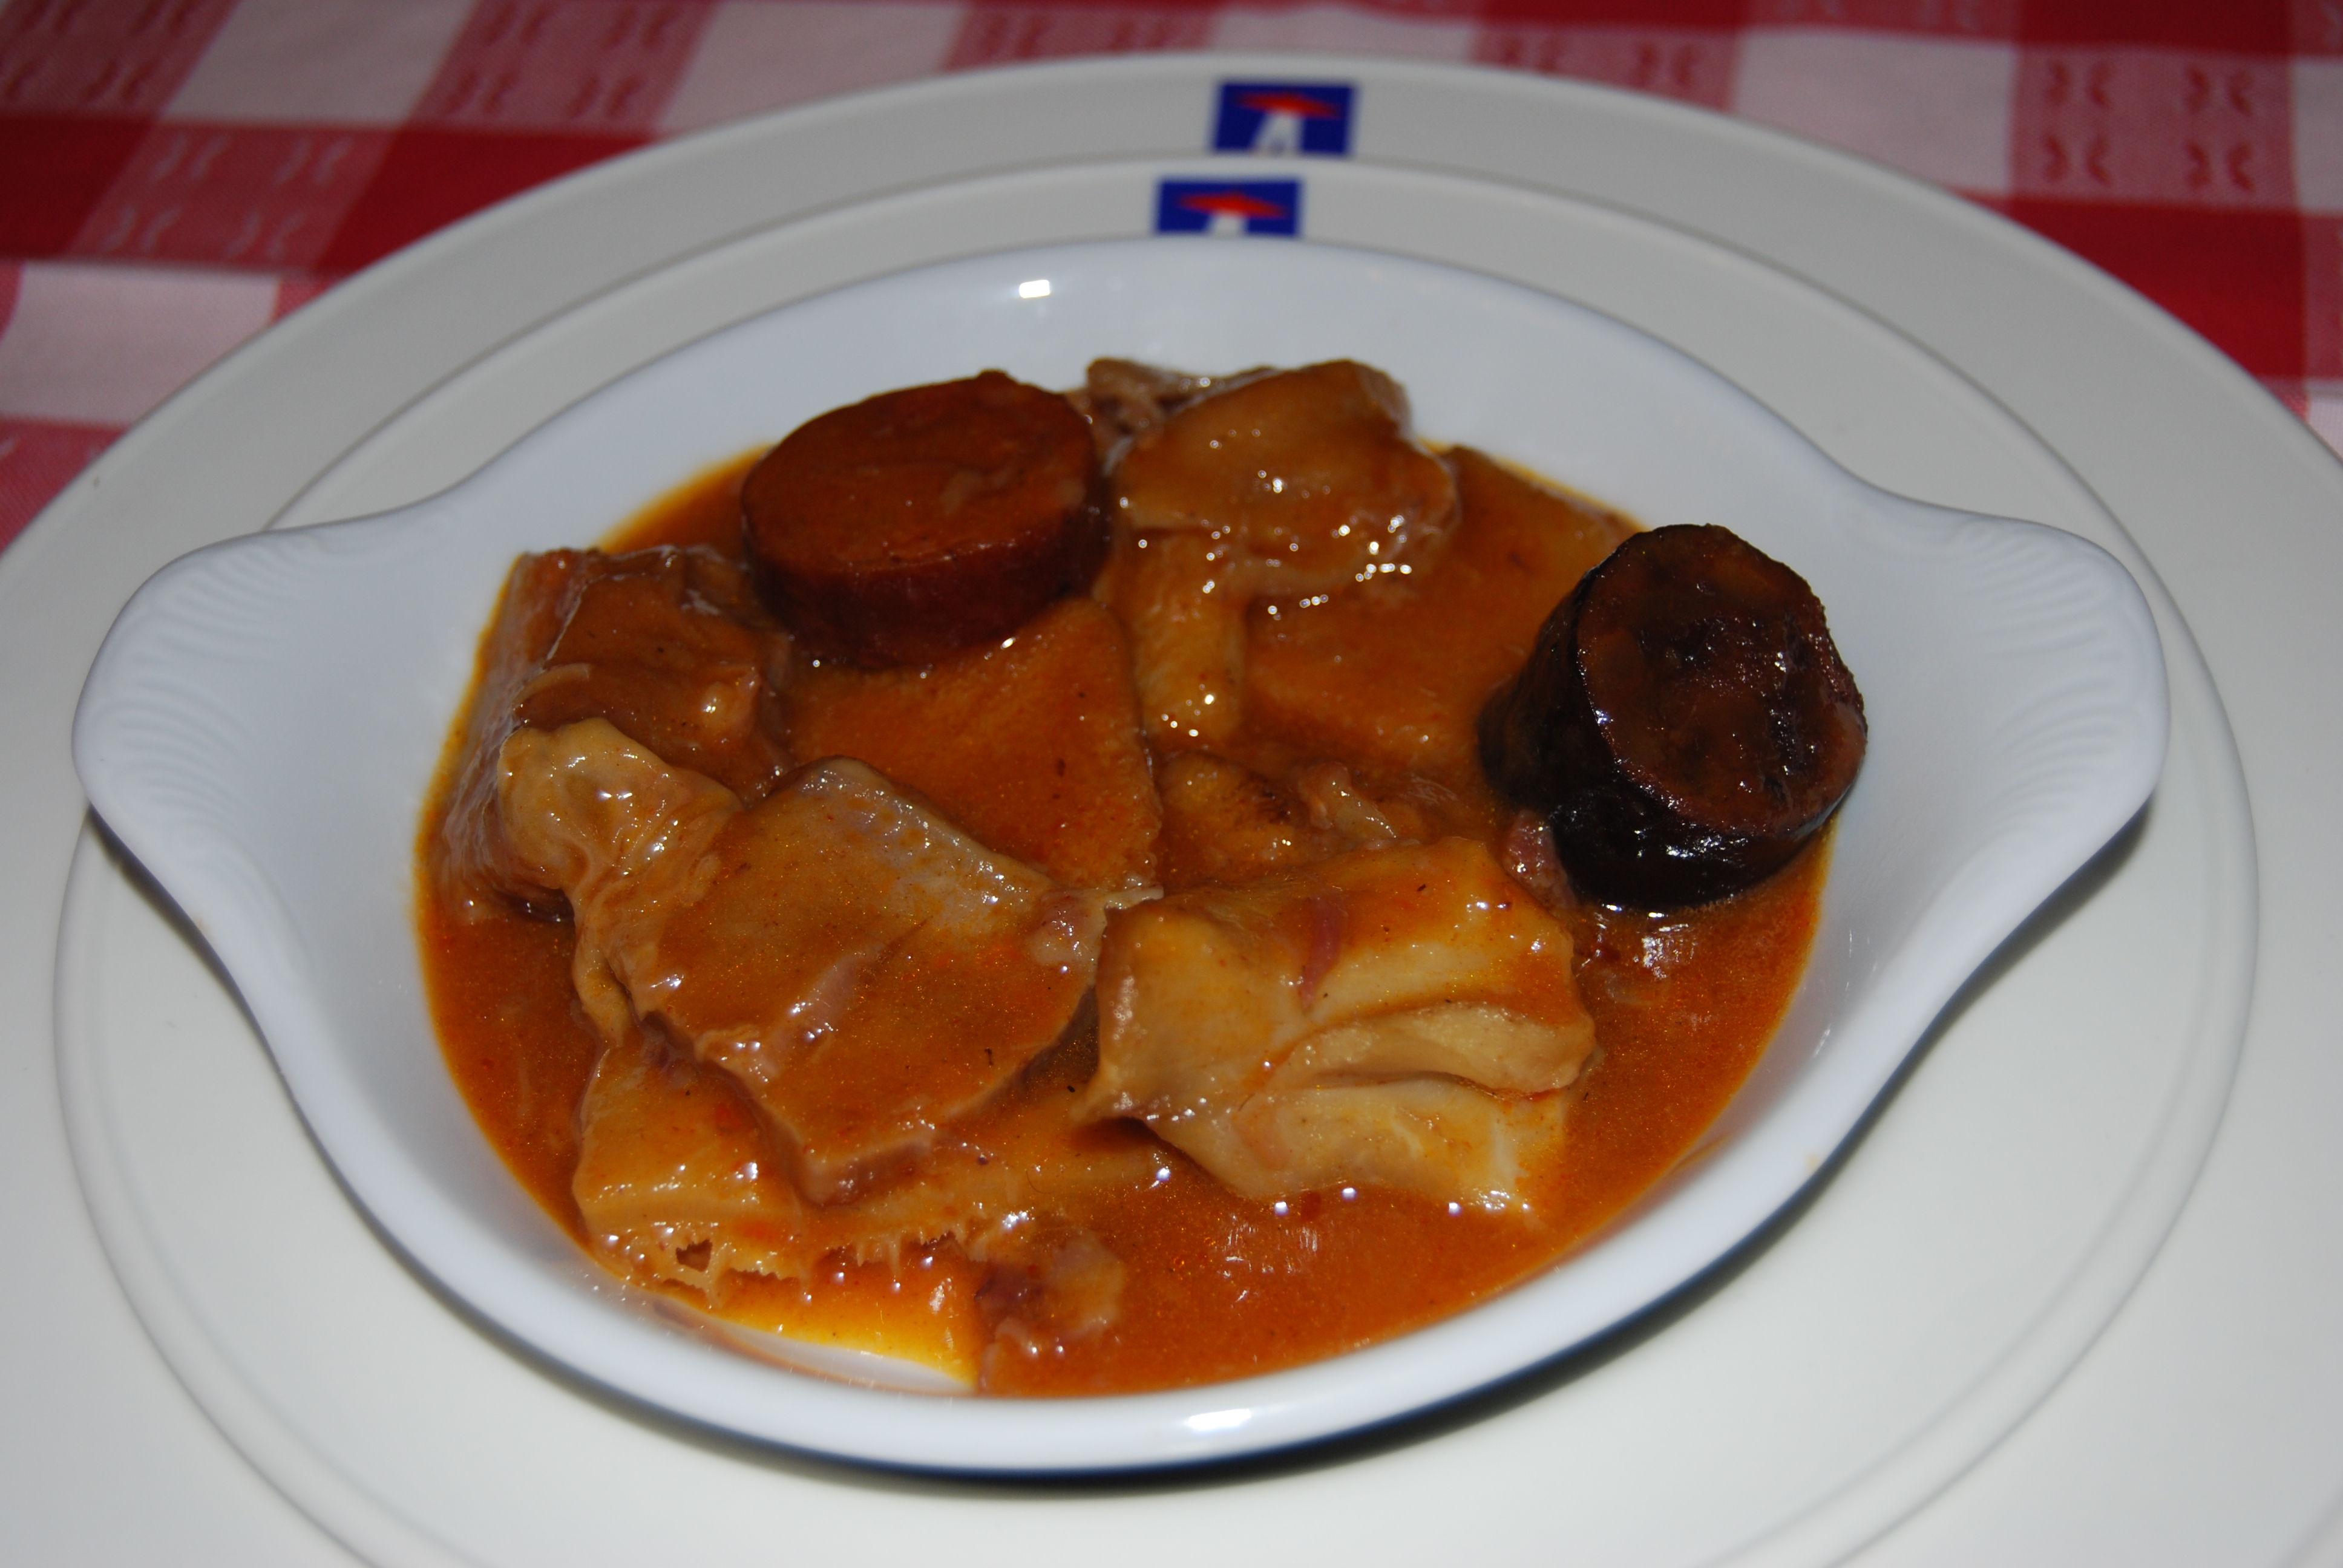 Braised tripe, snouts and pork feet